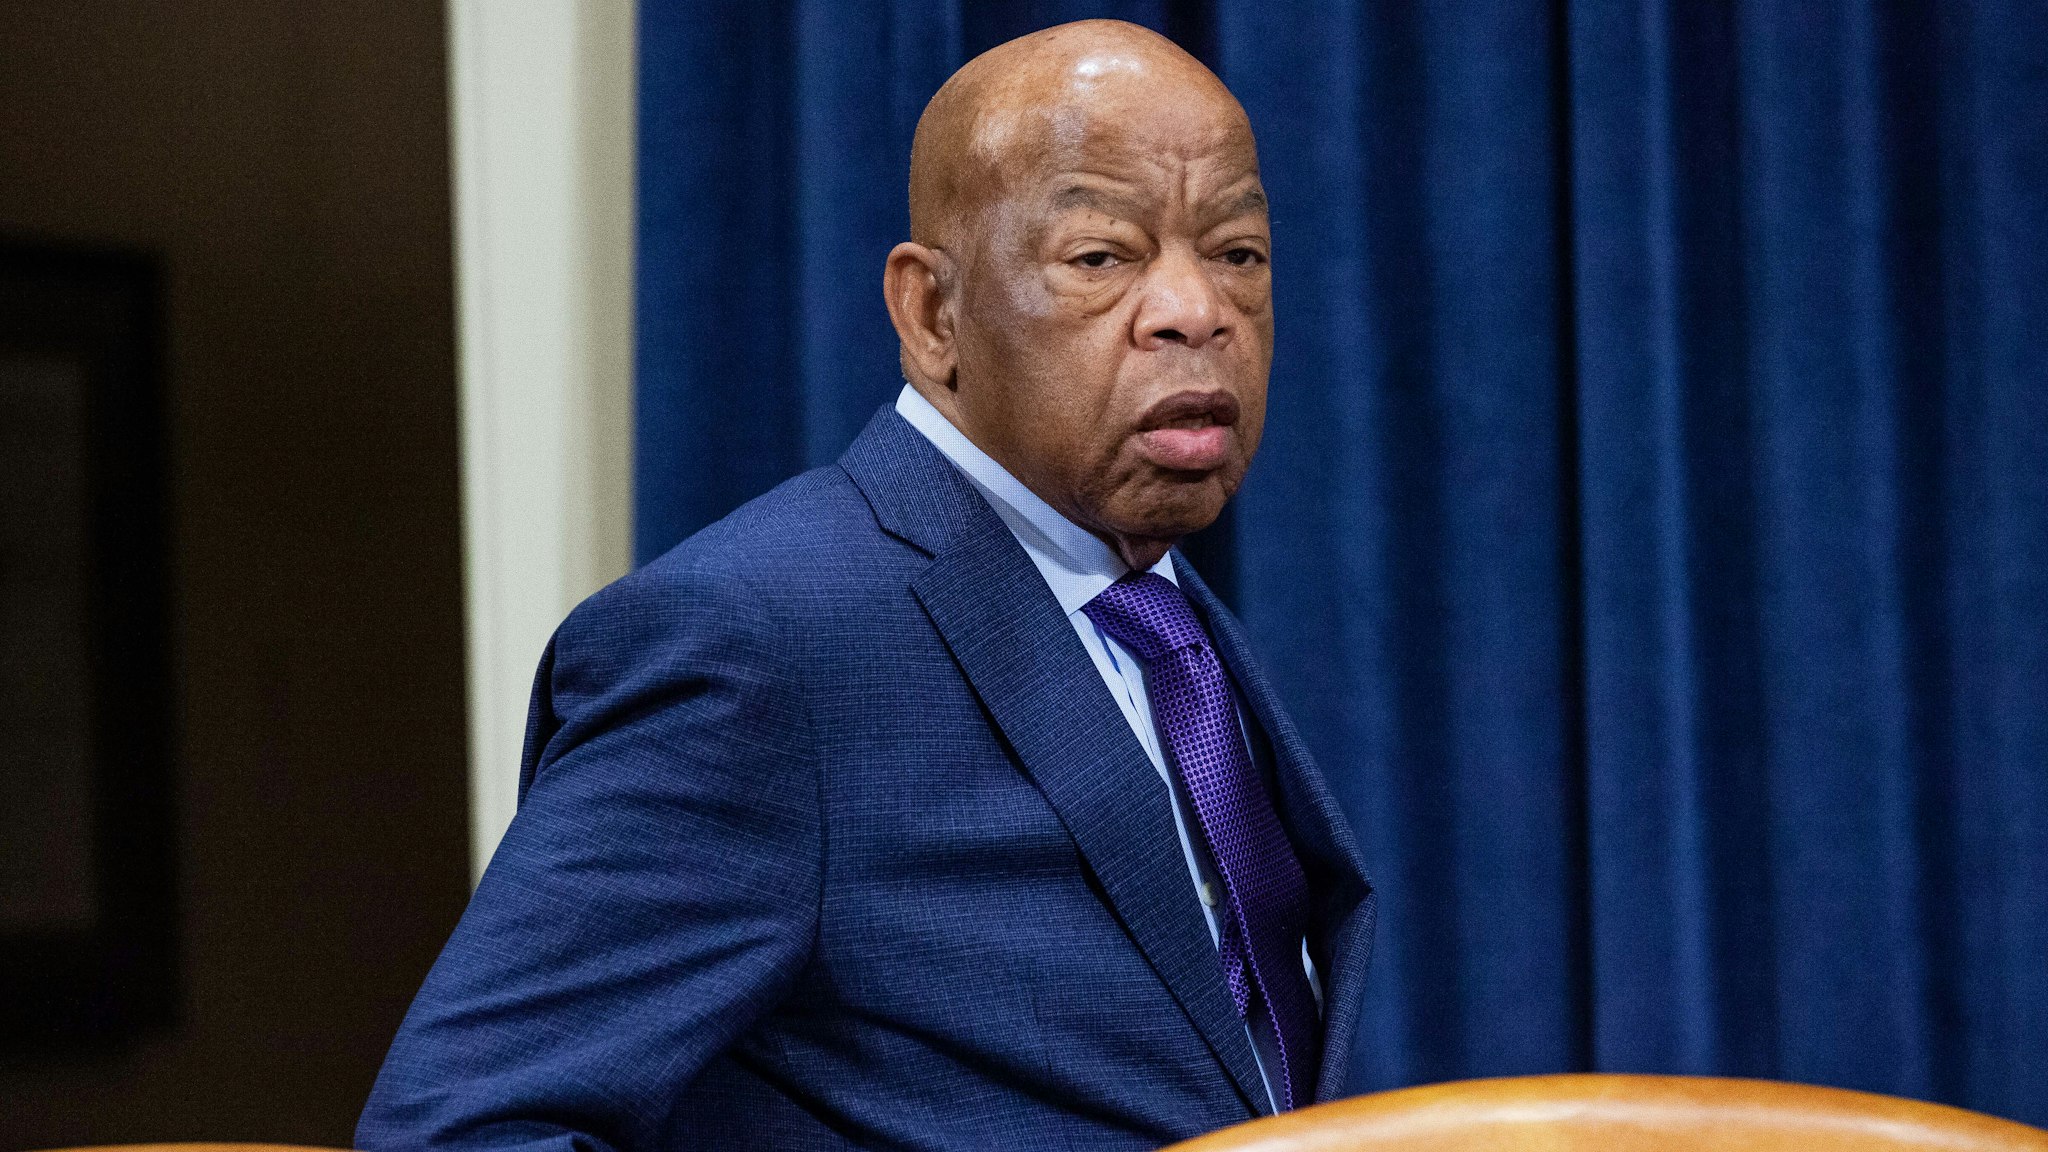 Representative John Lewis, a Democrat from Georgia and chairman of the House Ways and Means Oversight Subcommittee, arrives for a hearing with Steven Mnuchin, U.S. Treasury secretary, not pictured, in Washington, D.C., U.S., on Thursday, March 14, 2019. Mnuchin said if Congress sends him a request for President Donald Trump's tax returns, he'll consult with the agency's legal department and follow the law.